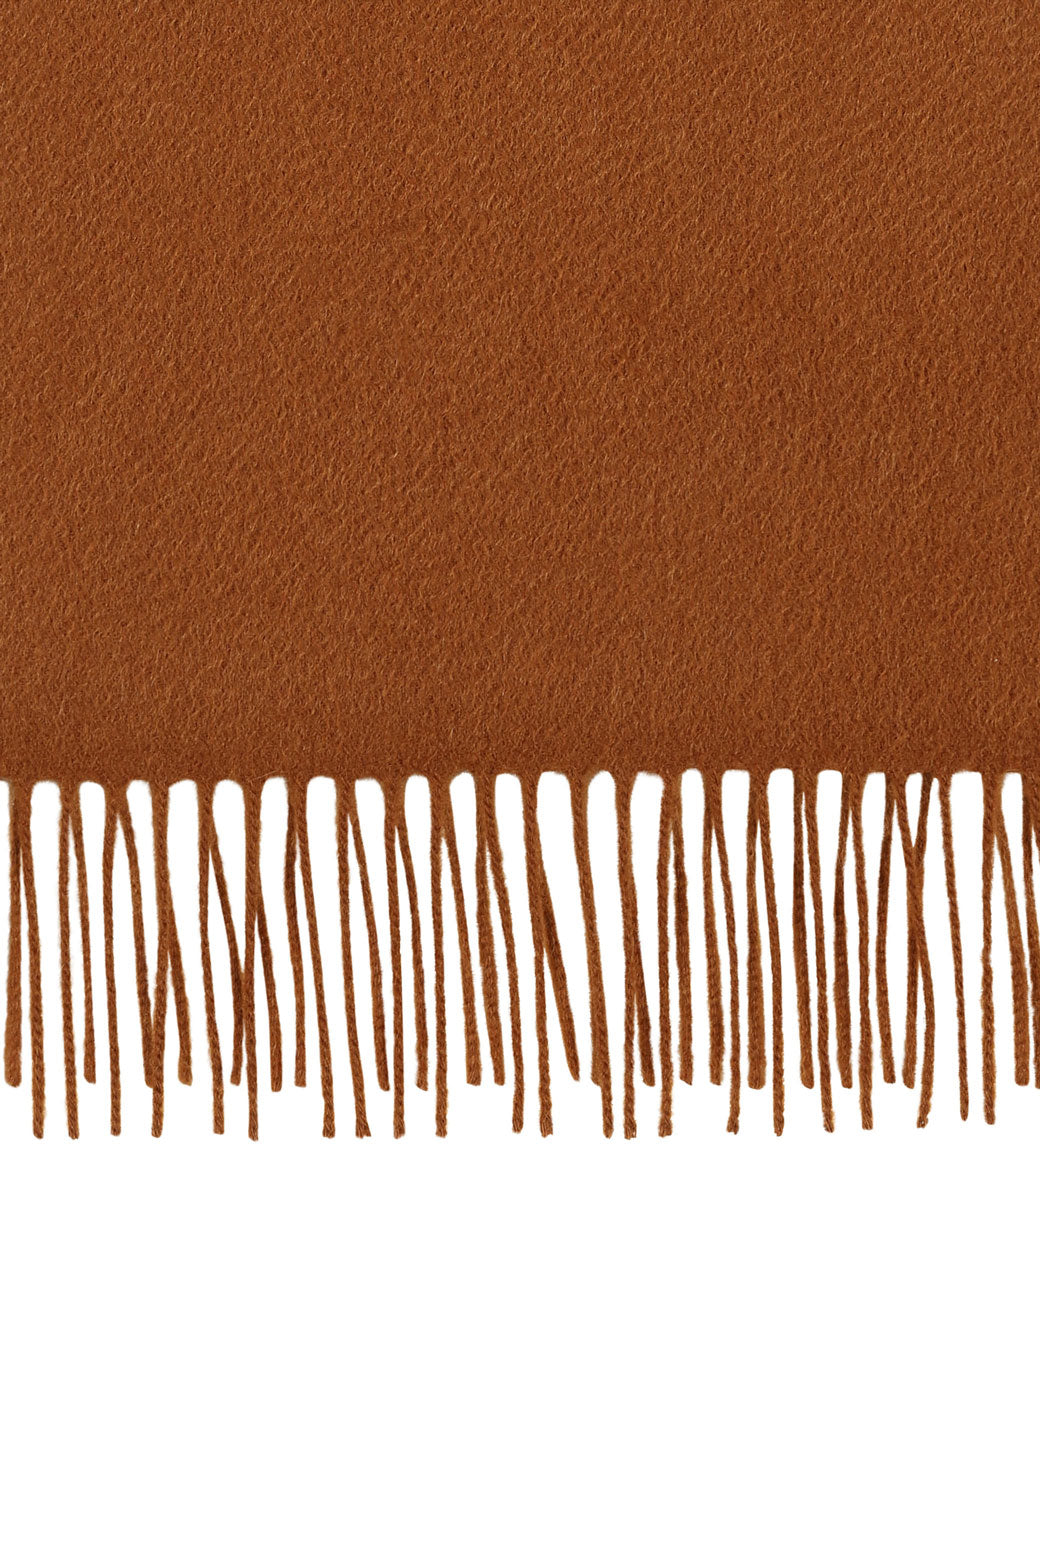 Perfectly horizontal view of the fringe of a camel pure cashmere scarf from Soho Scarves against a white background.